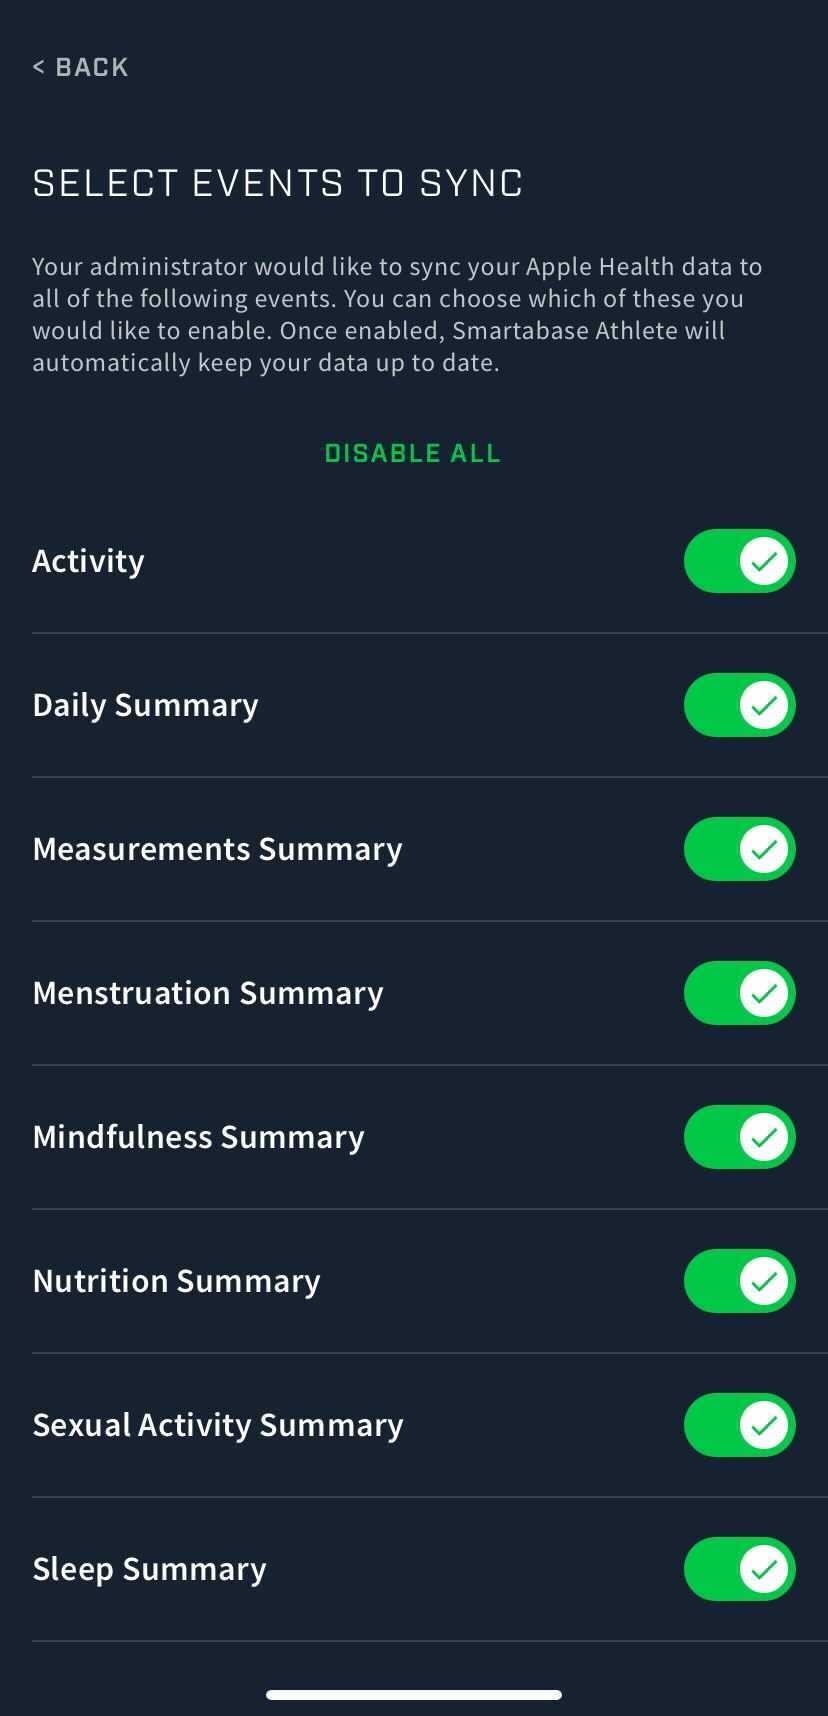 A screenshot of the event forms that are available for the Apple Health integration.